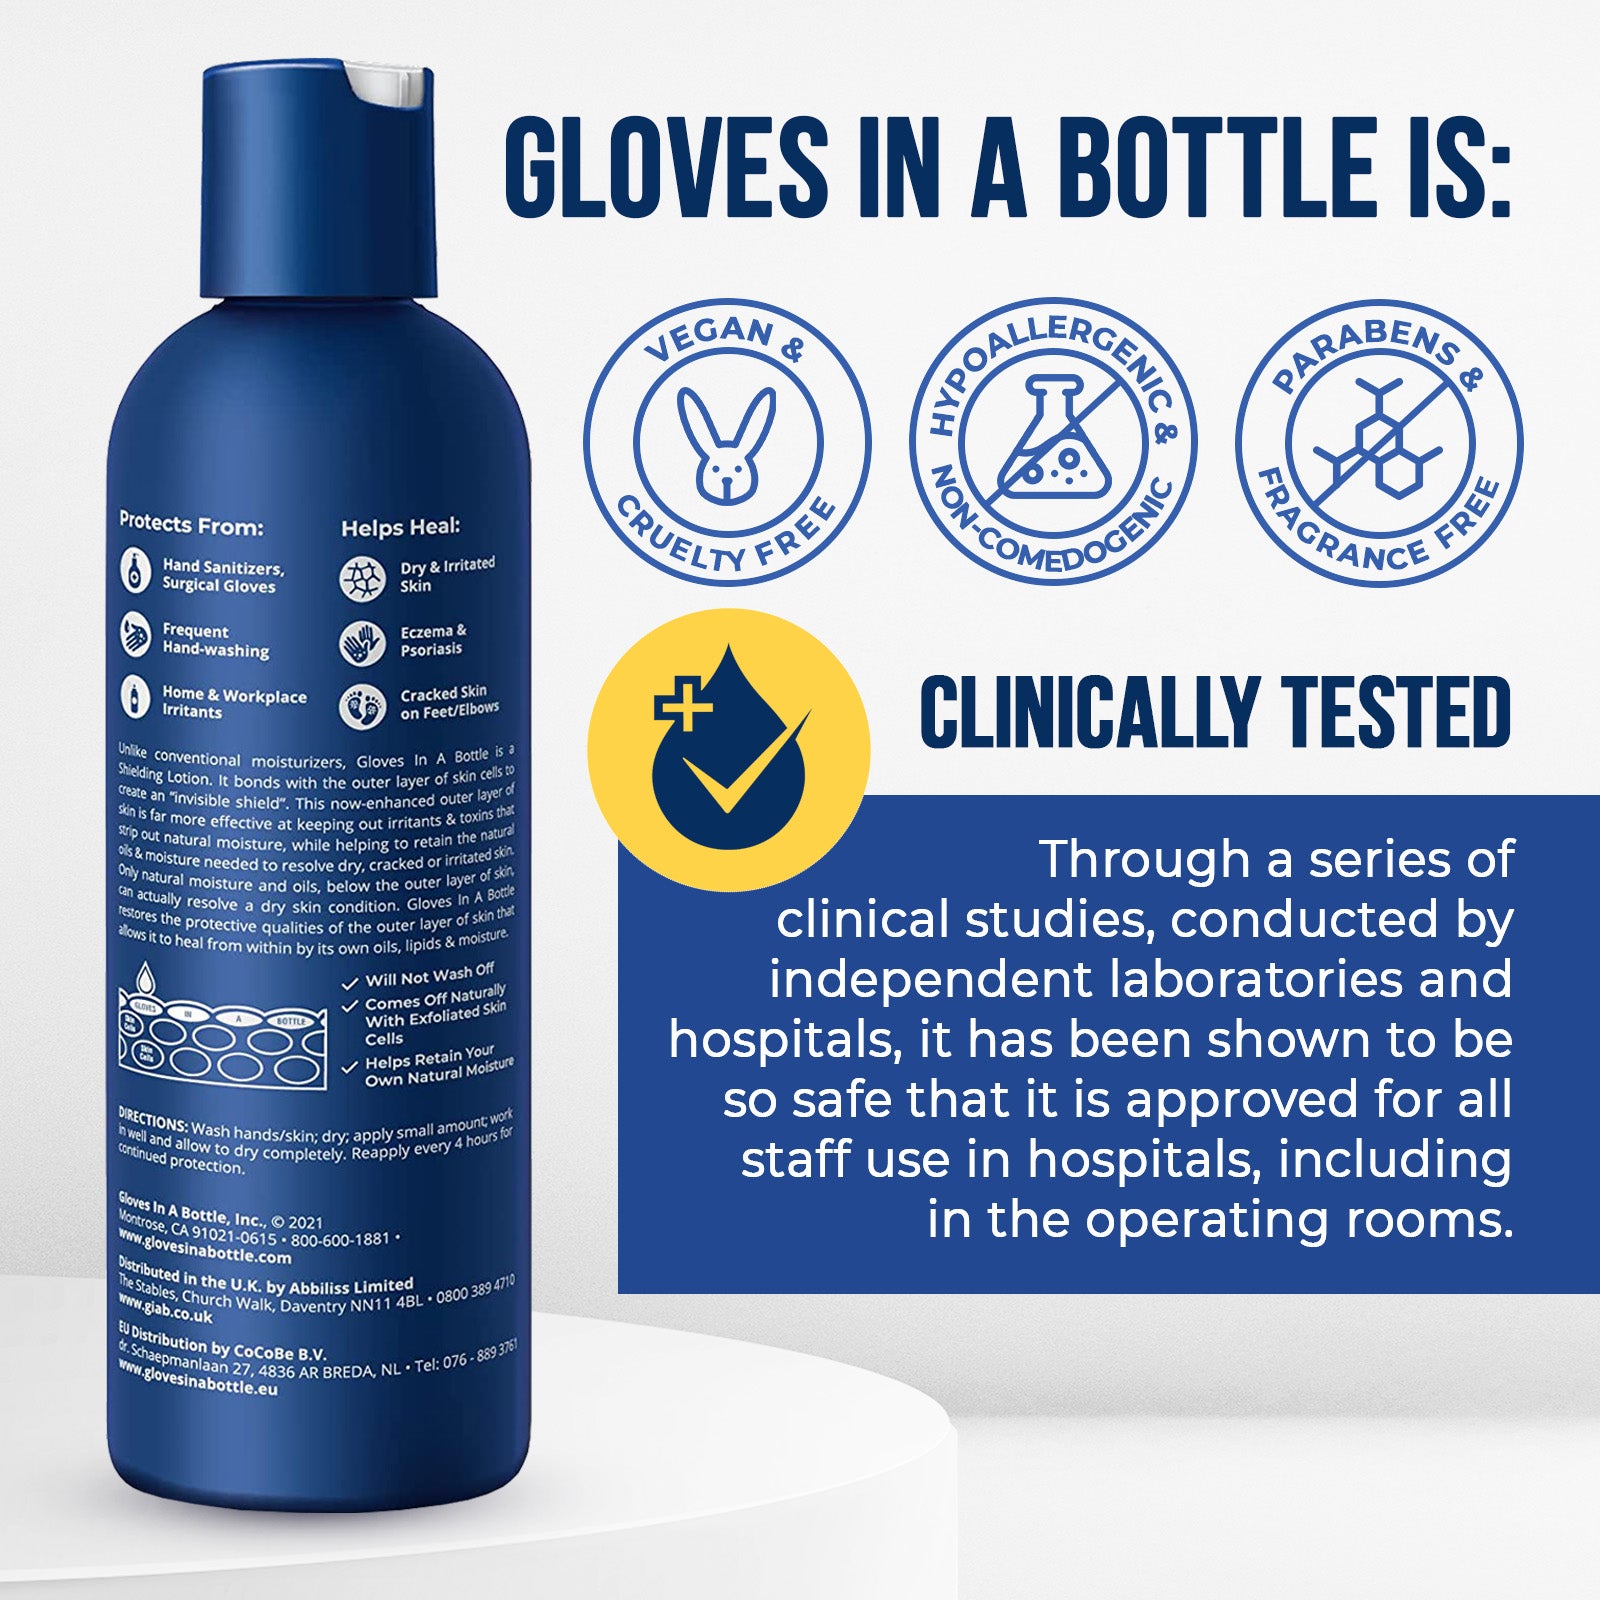 Gloves In A Bottle Shielding Lotion - Great for Dry Itchy Skin! 3 8oz Bottles + Pump